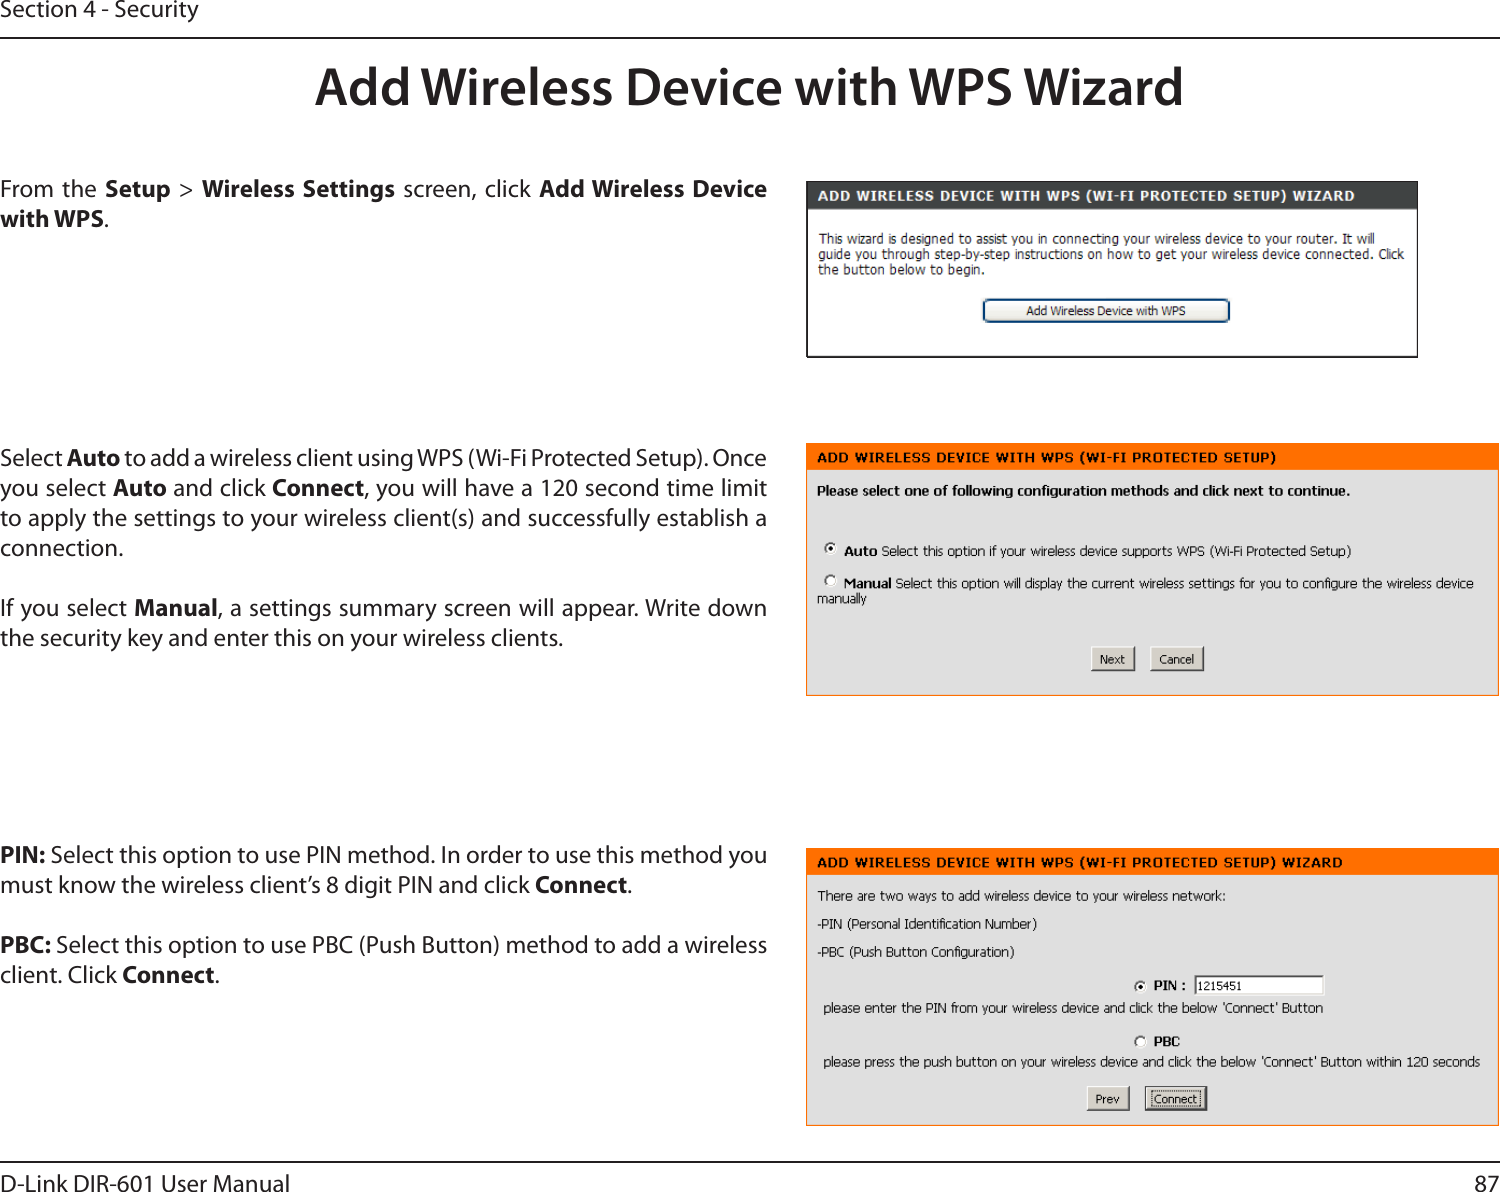 87D-Link DIR-601 User ManualSection 4 - SecurityFrom the Setup &gt; WirelessSettings screen, click Add Wireless  Device withWPS.Add Wireless Device with WPS WizardPIN: Select this option to use PIN method. In order to use this method you must know the wireless client’s 8 digit PIN and click Connect.PBC: Select this option to use PBC (Push Button) method to add a wireless client. Click Connect.Select Auto to add a wireless client using WPS (Wi-Fi Protected Setup). Once you select Auto and click Connect, you will have a 120 second time limit to apply the settings to your wireless client(s) and successfully establish a connection. If you select Manual, a settings summary screen will appear. Write down the security key and enter this on your wireless clients. 